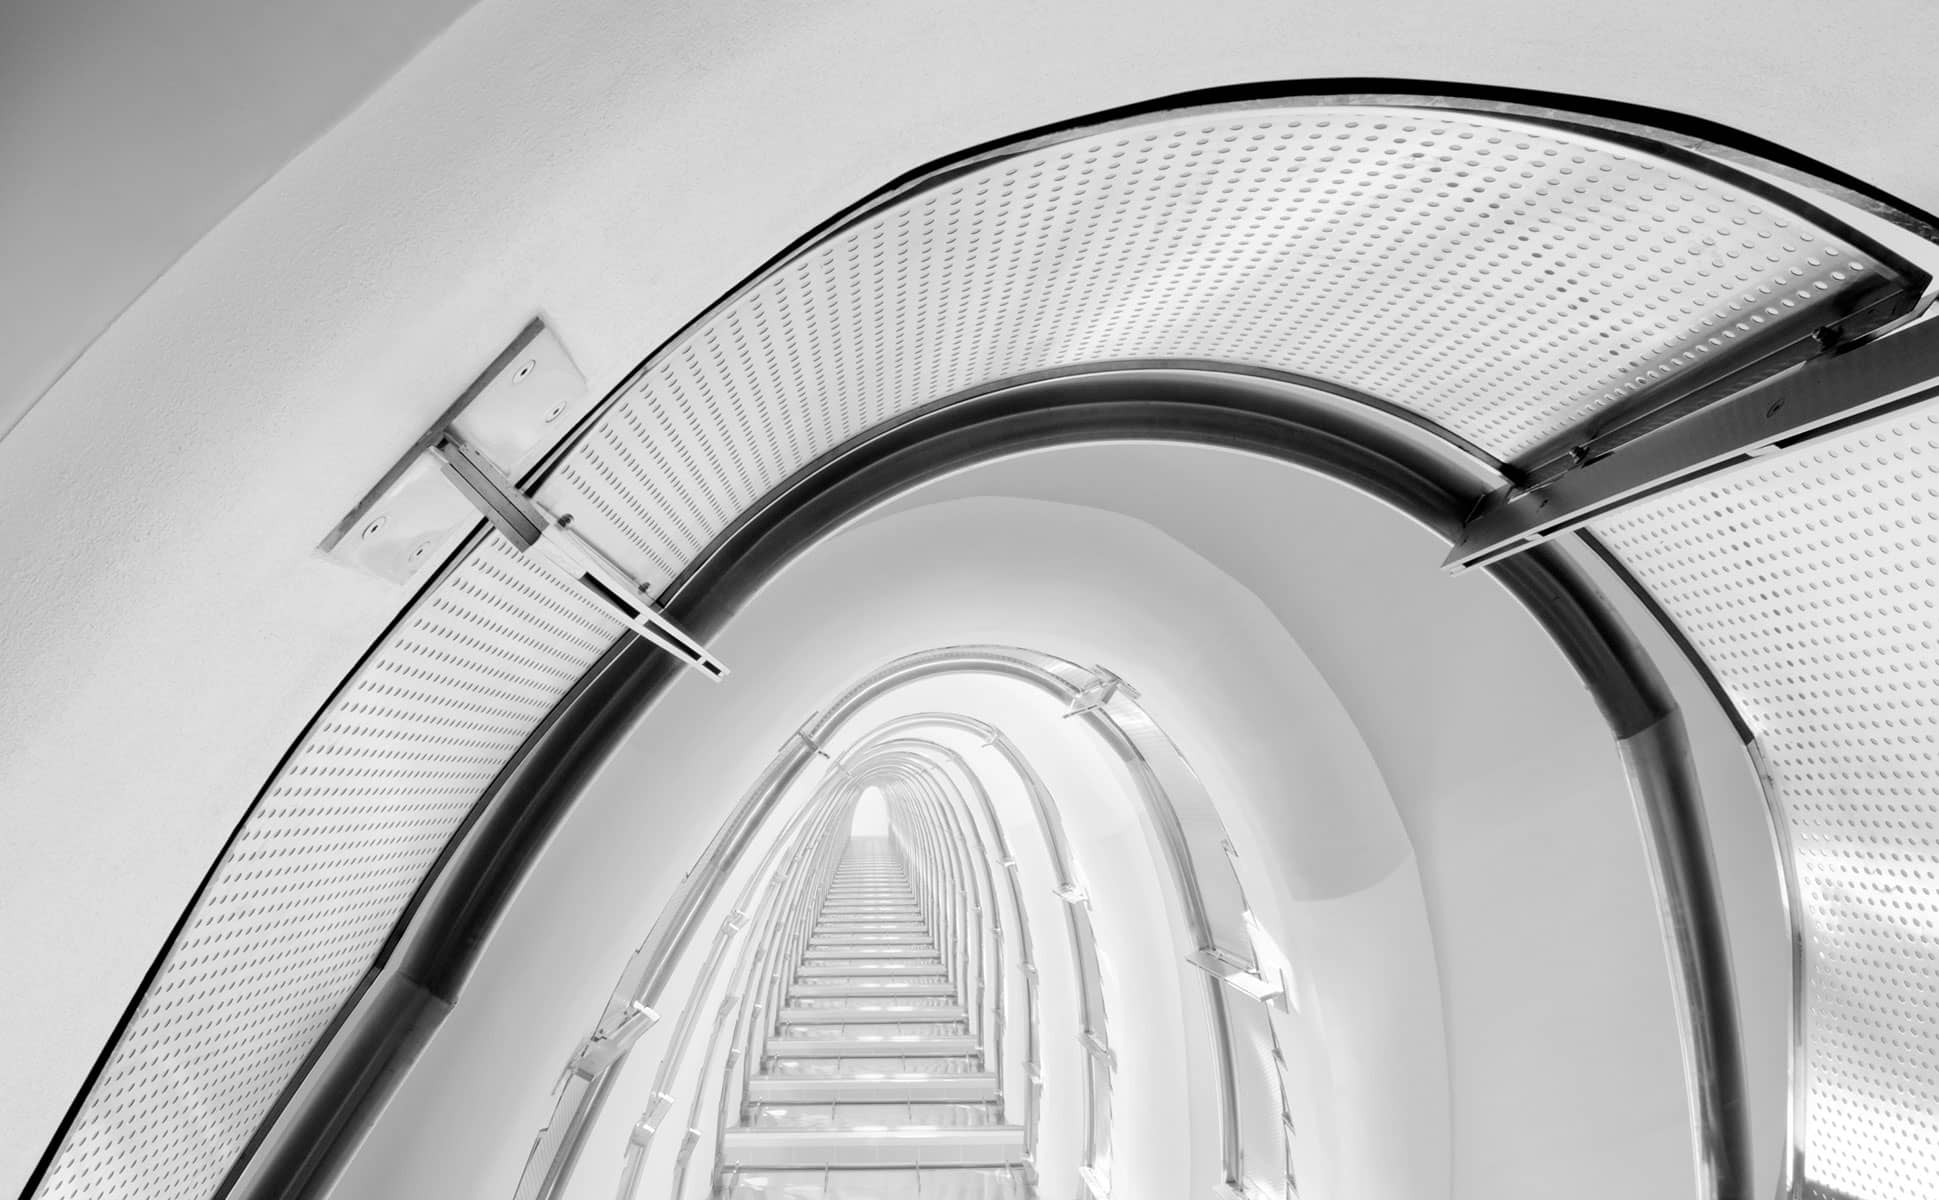 Architecture Photography: Stairwell at ADIA Building Abu Dhabi.